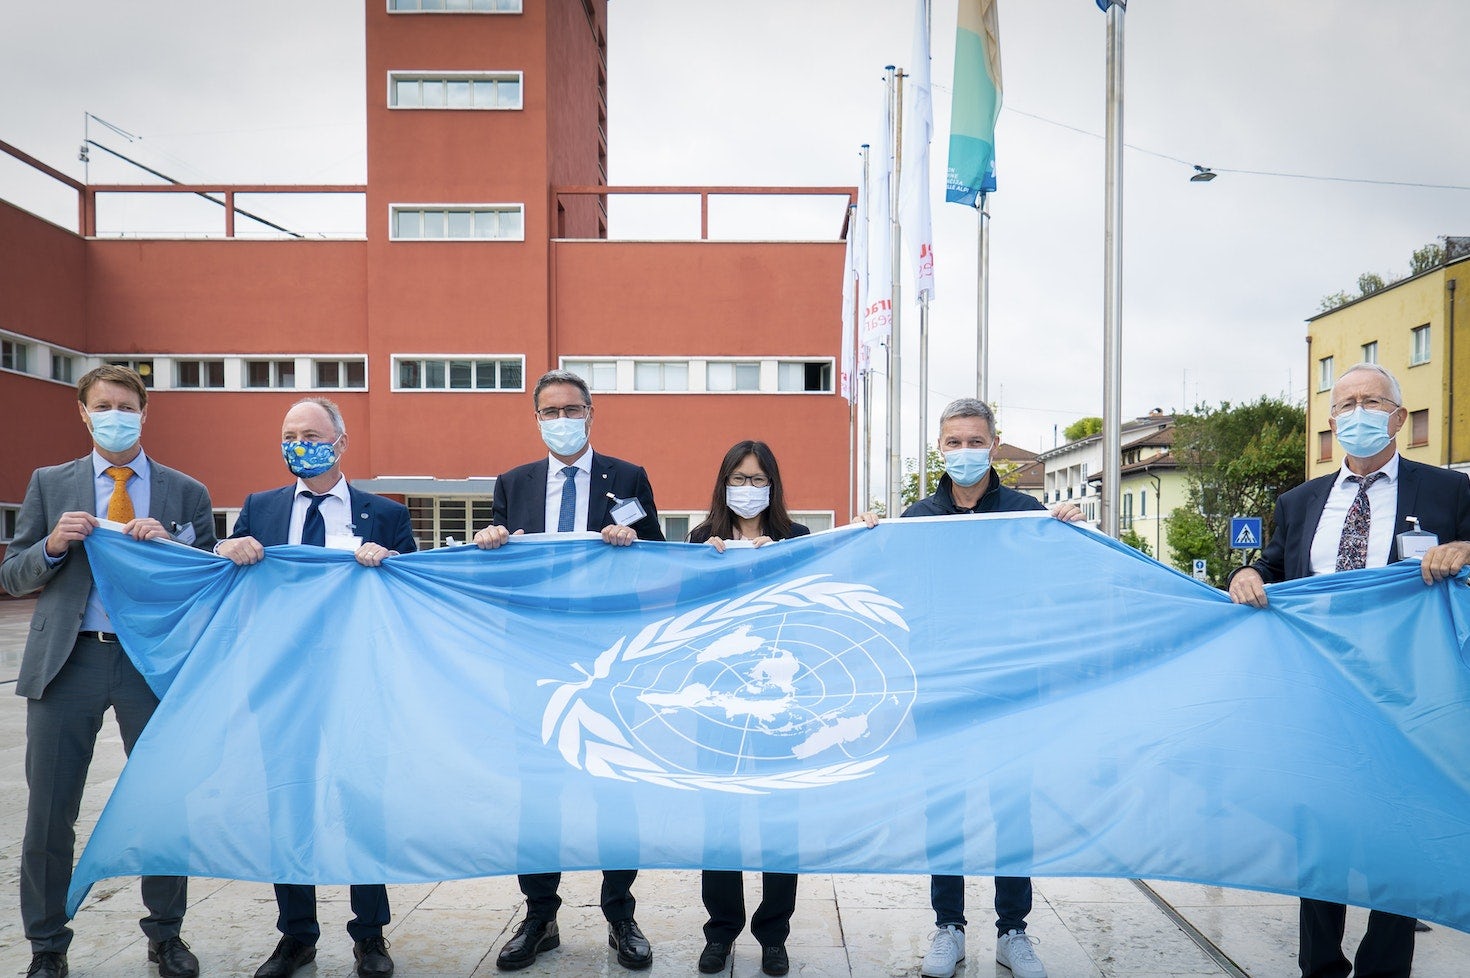 this picture shows the UN flag raising that took place on September 25th, 2020. The event marked the official establishment of the United Nations duty station in Bolzano, where the center Global Mountain Safeguard Research (GLOMOS) is jointly run by UNU-EHS and Eurac Research. Present to the event were (from left to right): GLOMOS directors Stefan Schneiderbauer and Joerg Szarzynski, South Tyrol governor Arno Kompatscher, UNU Vice-Rector for Europe and UNU-EHS’ Director Shen Xiaomeng, Eurac Research President Roland Psenner and Director Stephan Ortner.